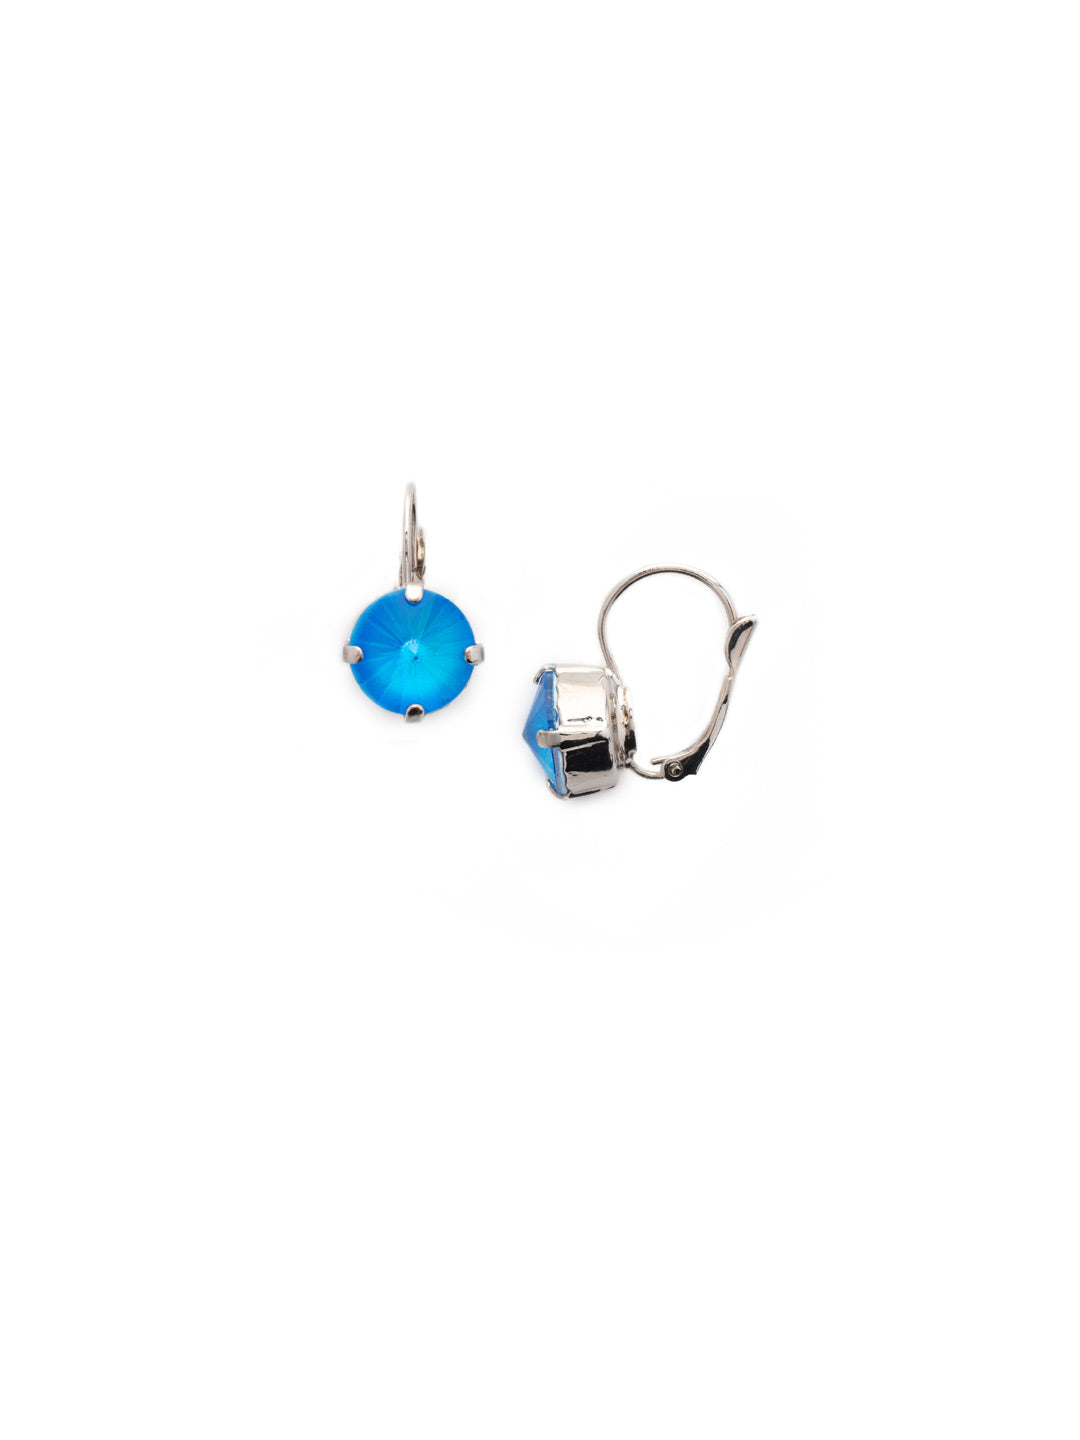 Mara Dangle Earrings - EET60PDBPY - <p>Add just a touch of sparkle and shine to any outfit with the Mara Dangle Earrings. They're classics. From Sorrelli's Blue Poppy collection in our Palladium finish.</p>